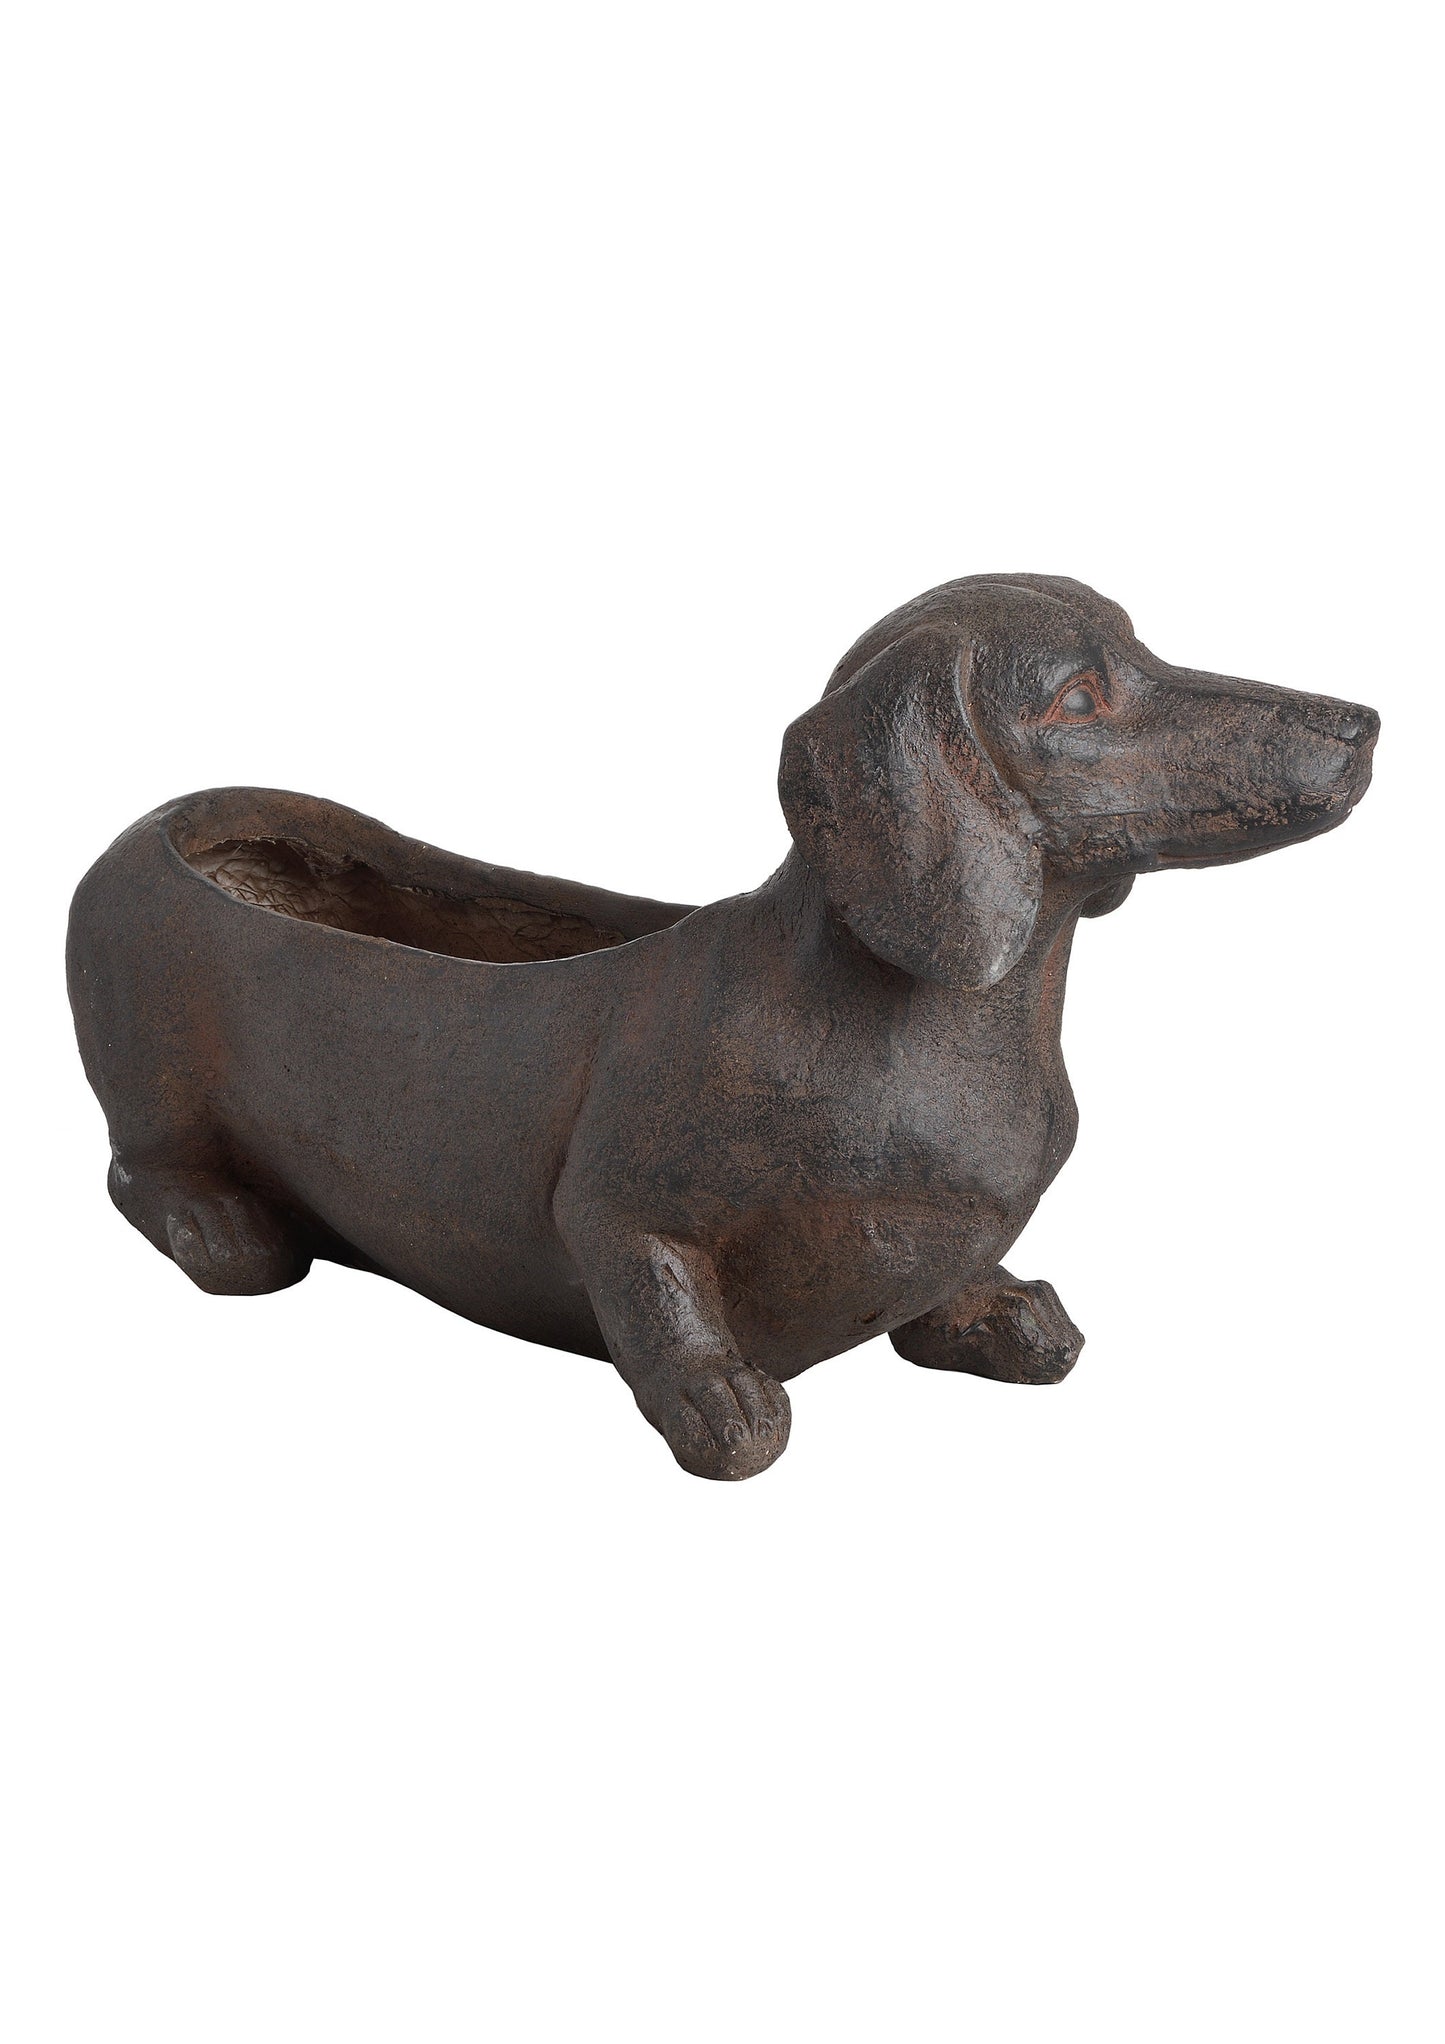 Dachshund Sausage Dog Quirky Rustic Planter